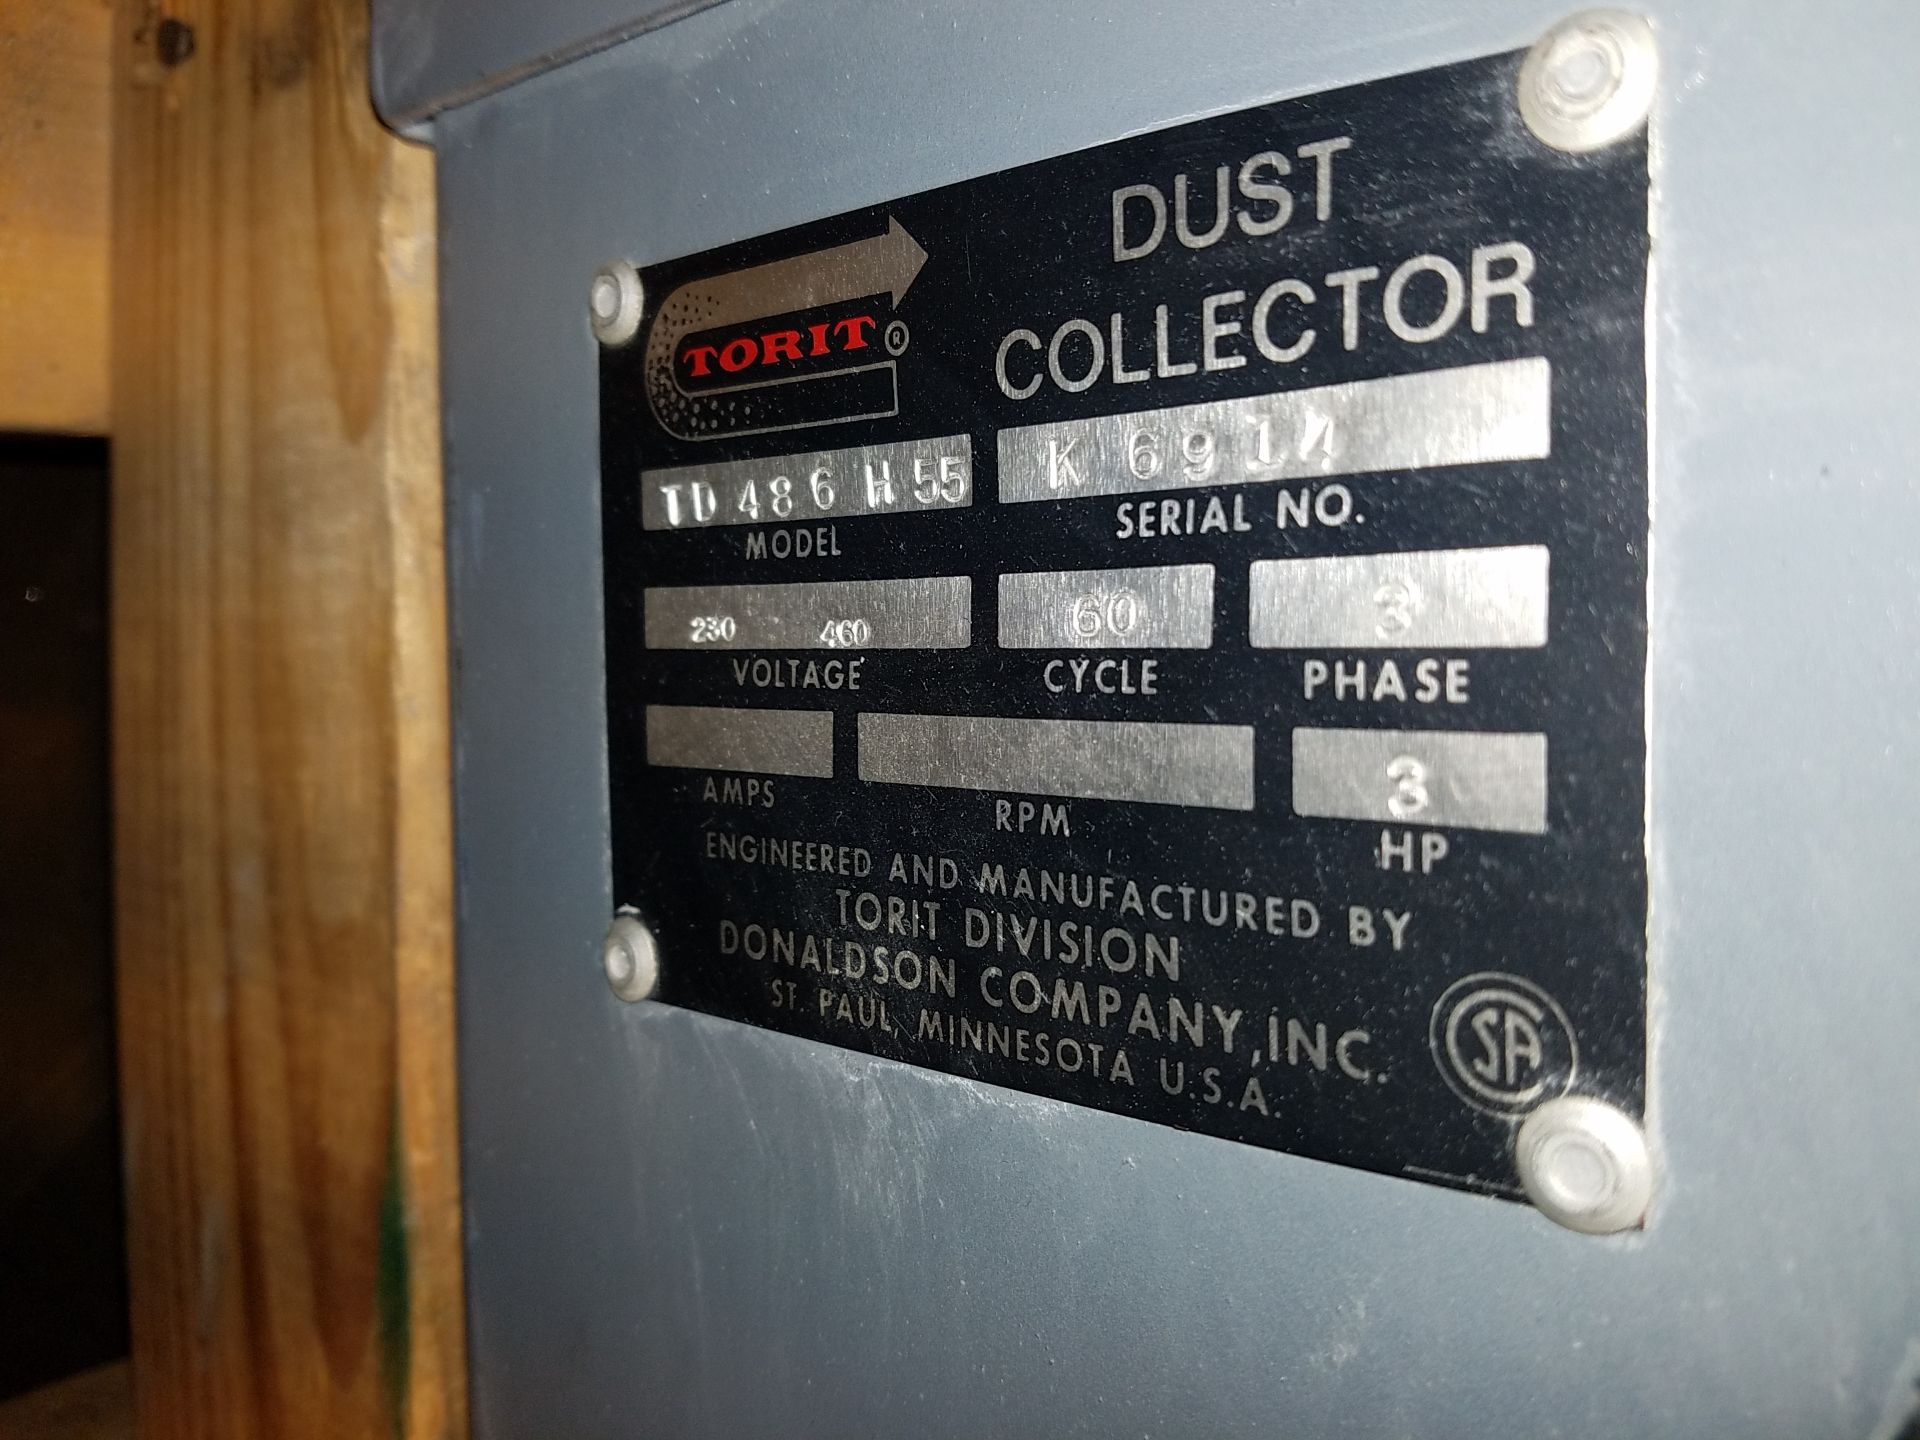 TORIT DUST COLLECTOR MODEL TD486H55 S#K6914(LOCATED AT 880 MAPLE AVE, CONNEAUT, OH 44030) - Image 2 of 2